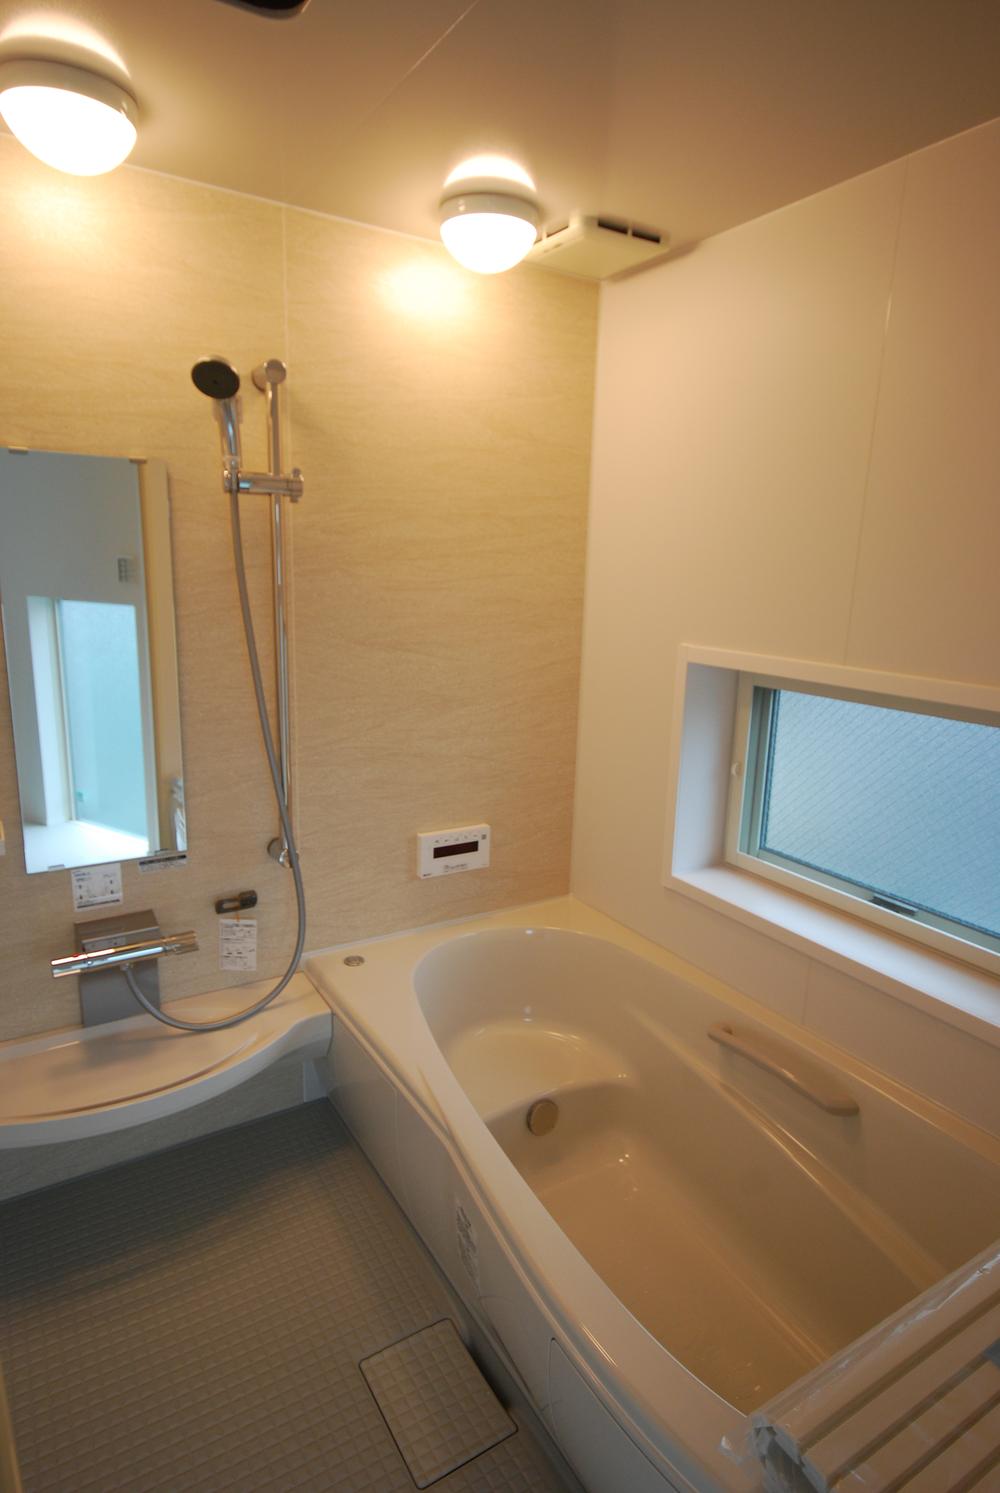 Bathroom. Spacious bathroom trees can be expected from the window